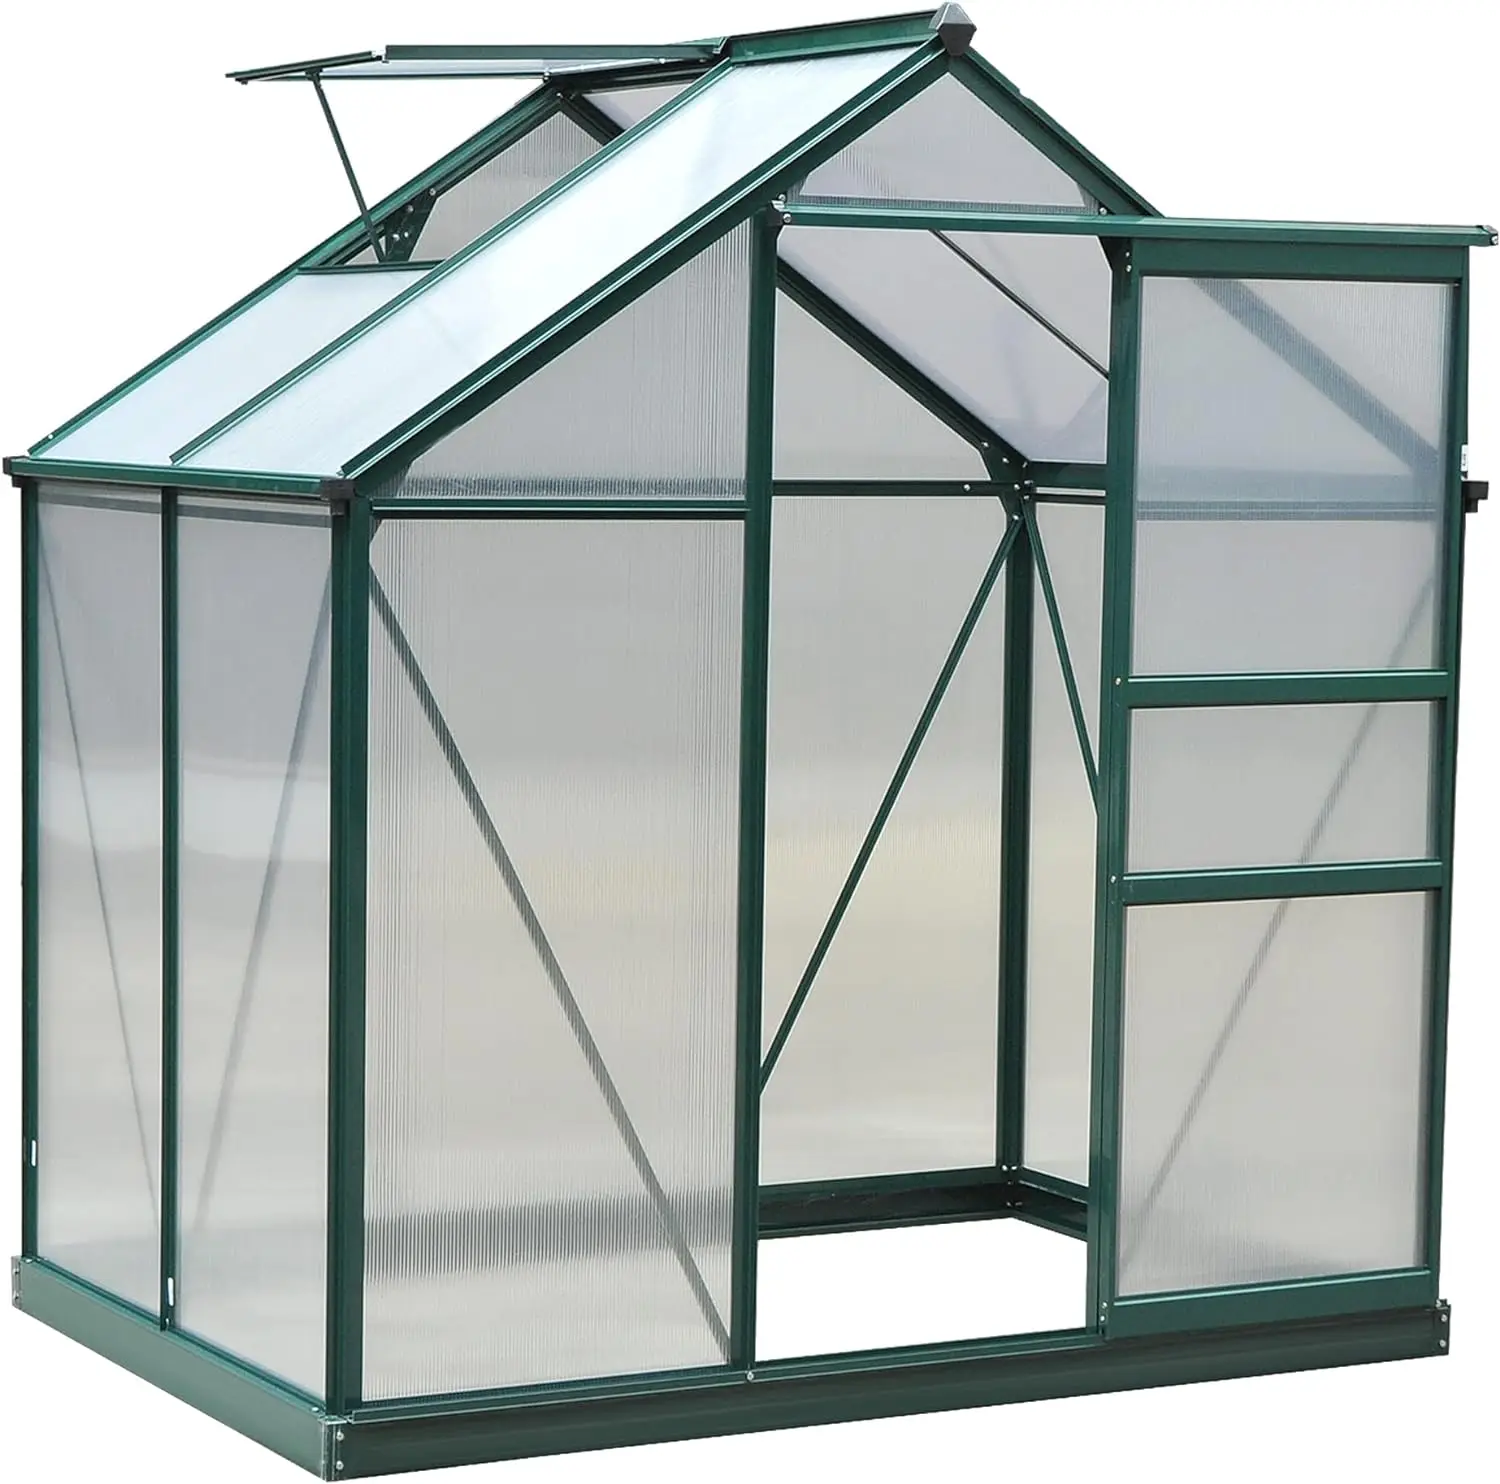 

6' x 4' x 6.5' Polycarbonate Greenhouse Heavy Duty Outdoor Aluminum Walk-in Green House Kit with Rain Gutter Vent and Door for